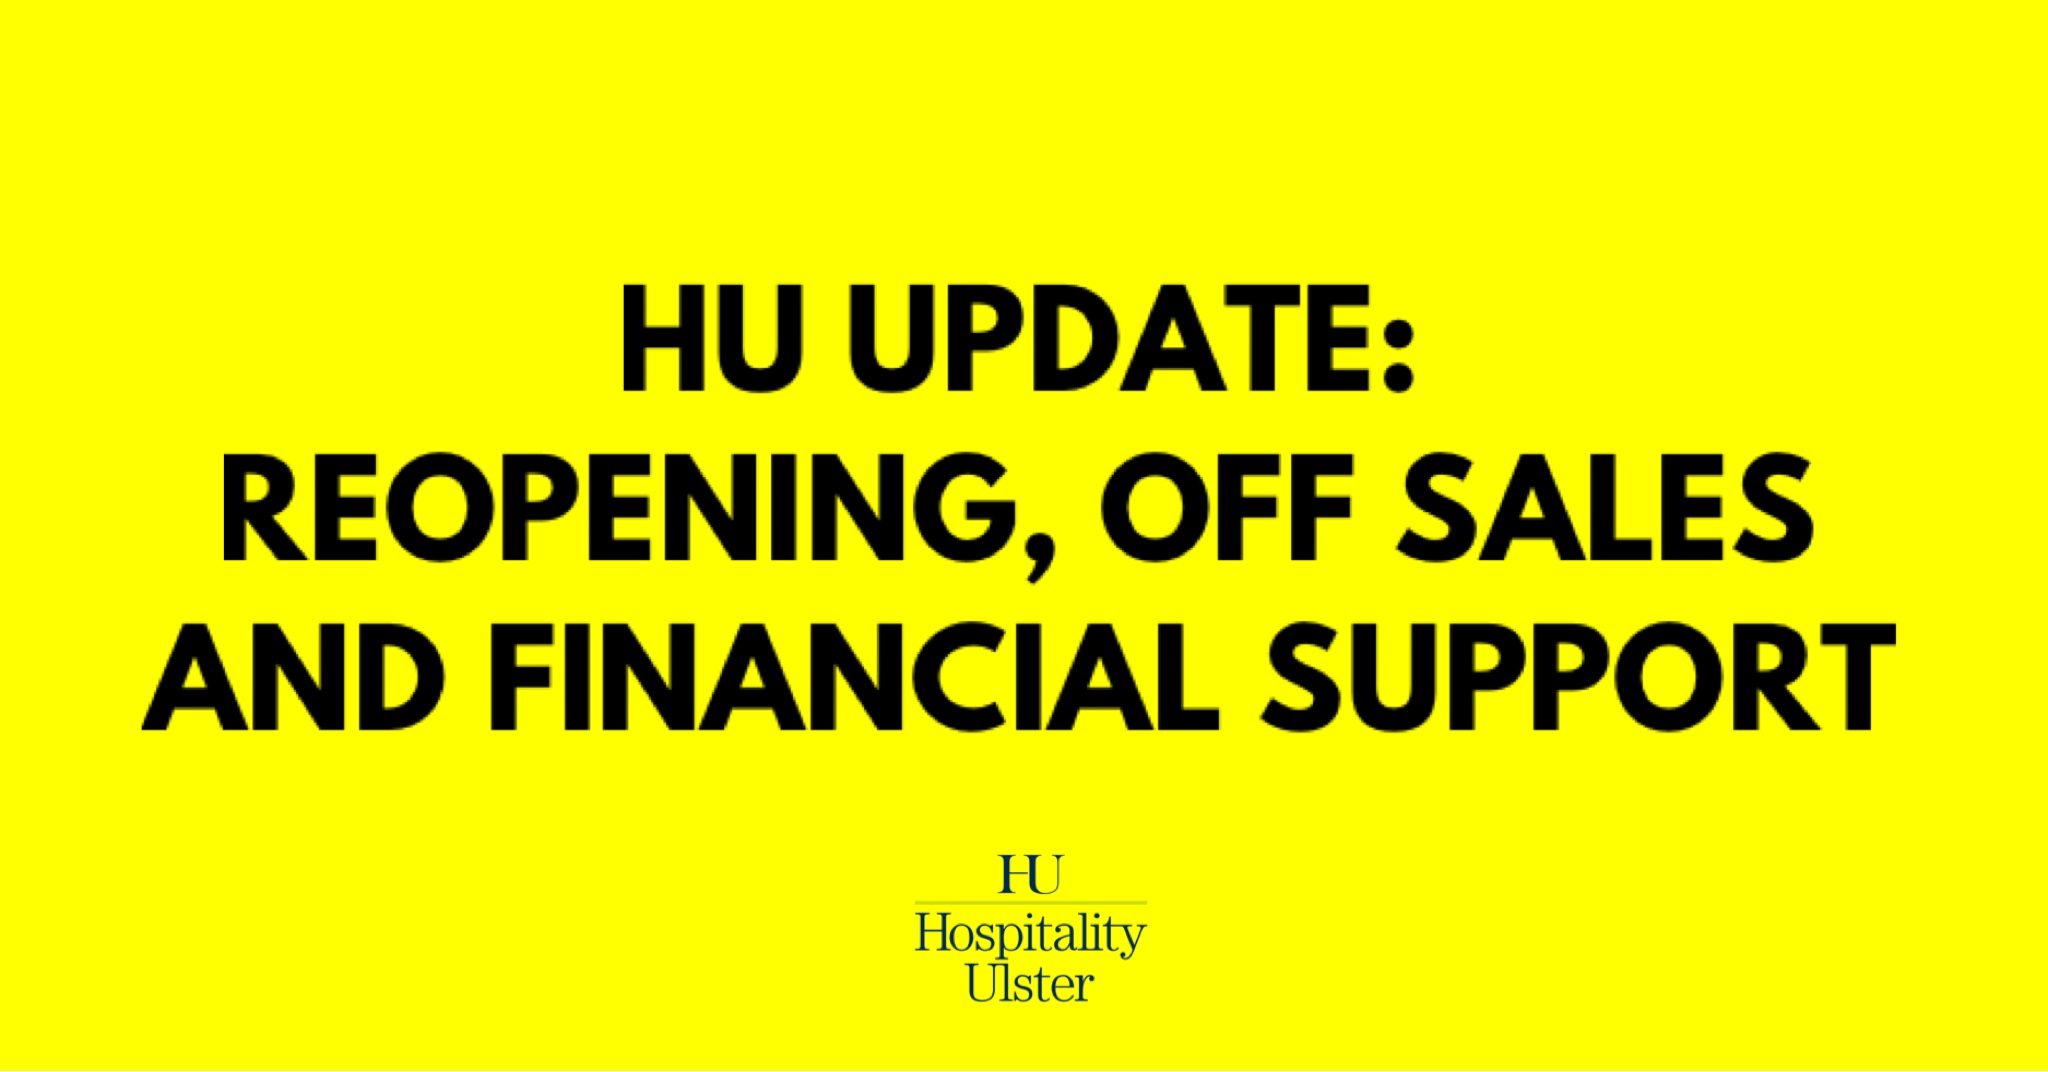 HU UPDATE - REOPENING - OFF SALES - FINANCIAL SUPPORT